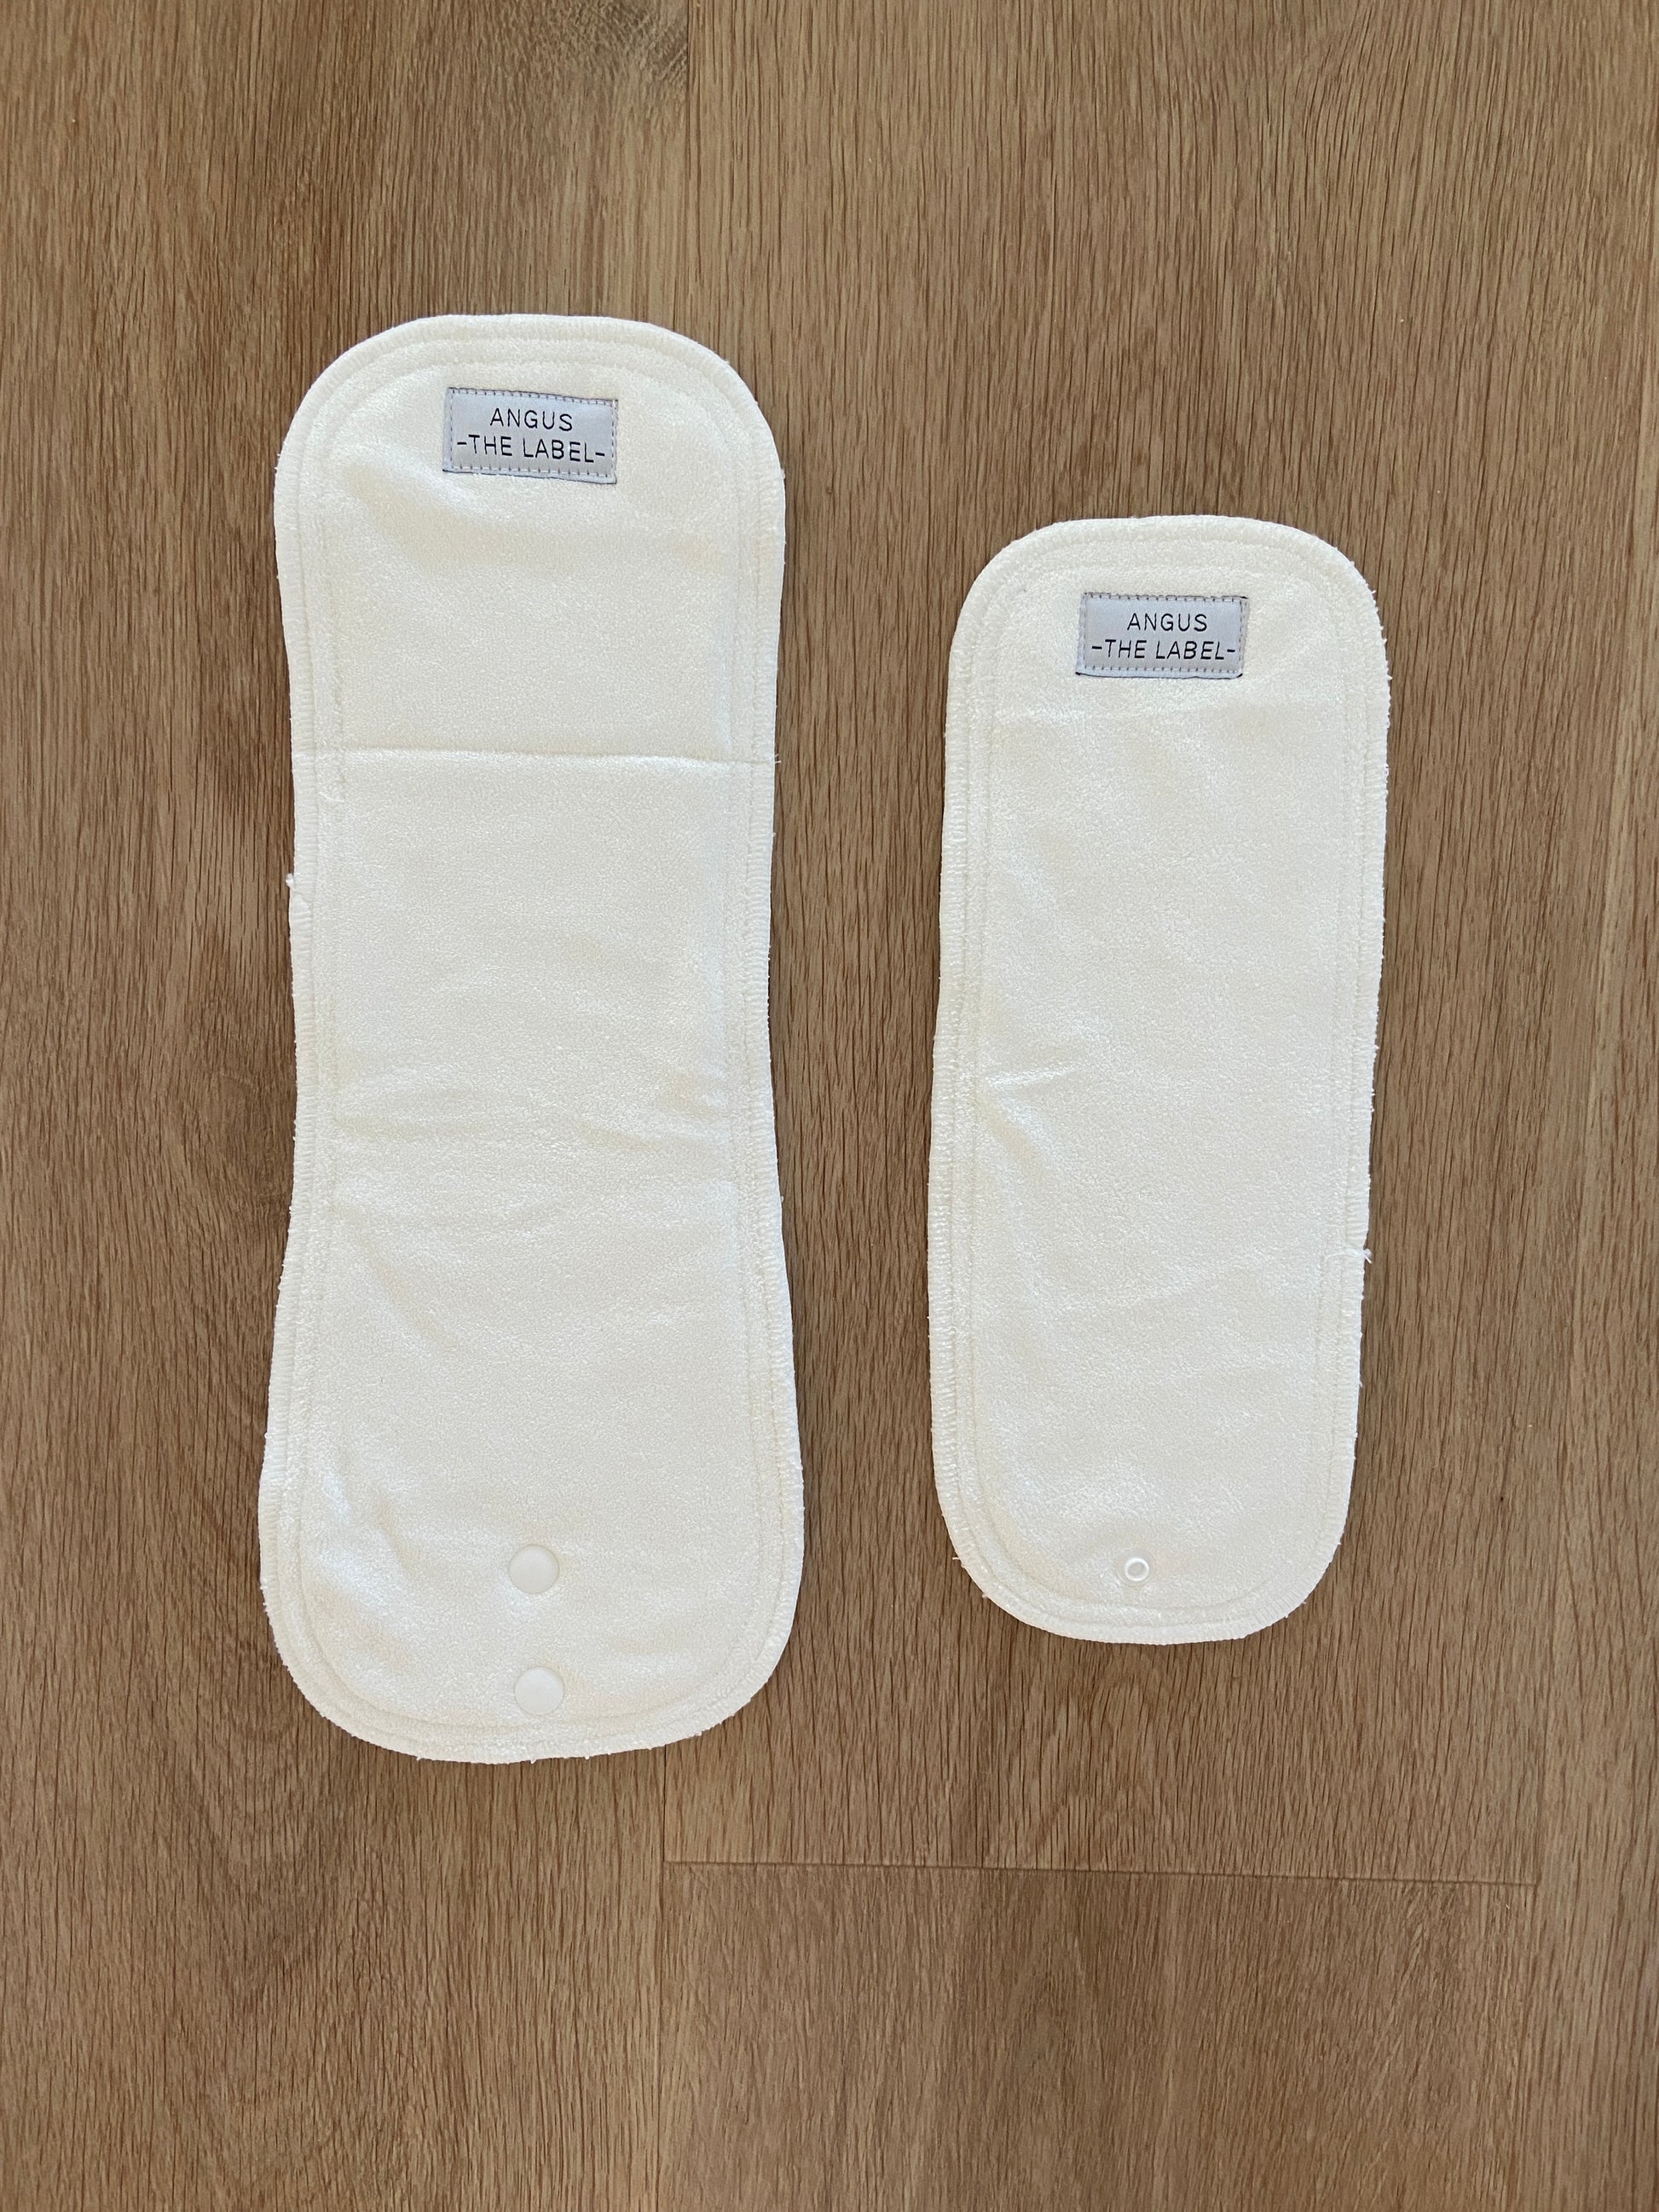 Two bamboo modern cloth nappy inserts lay flat on a wooden background